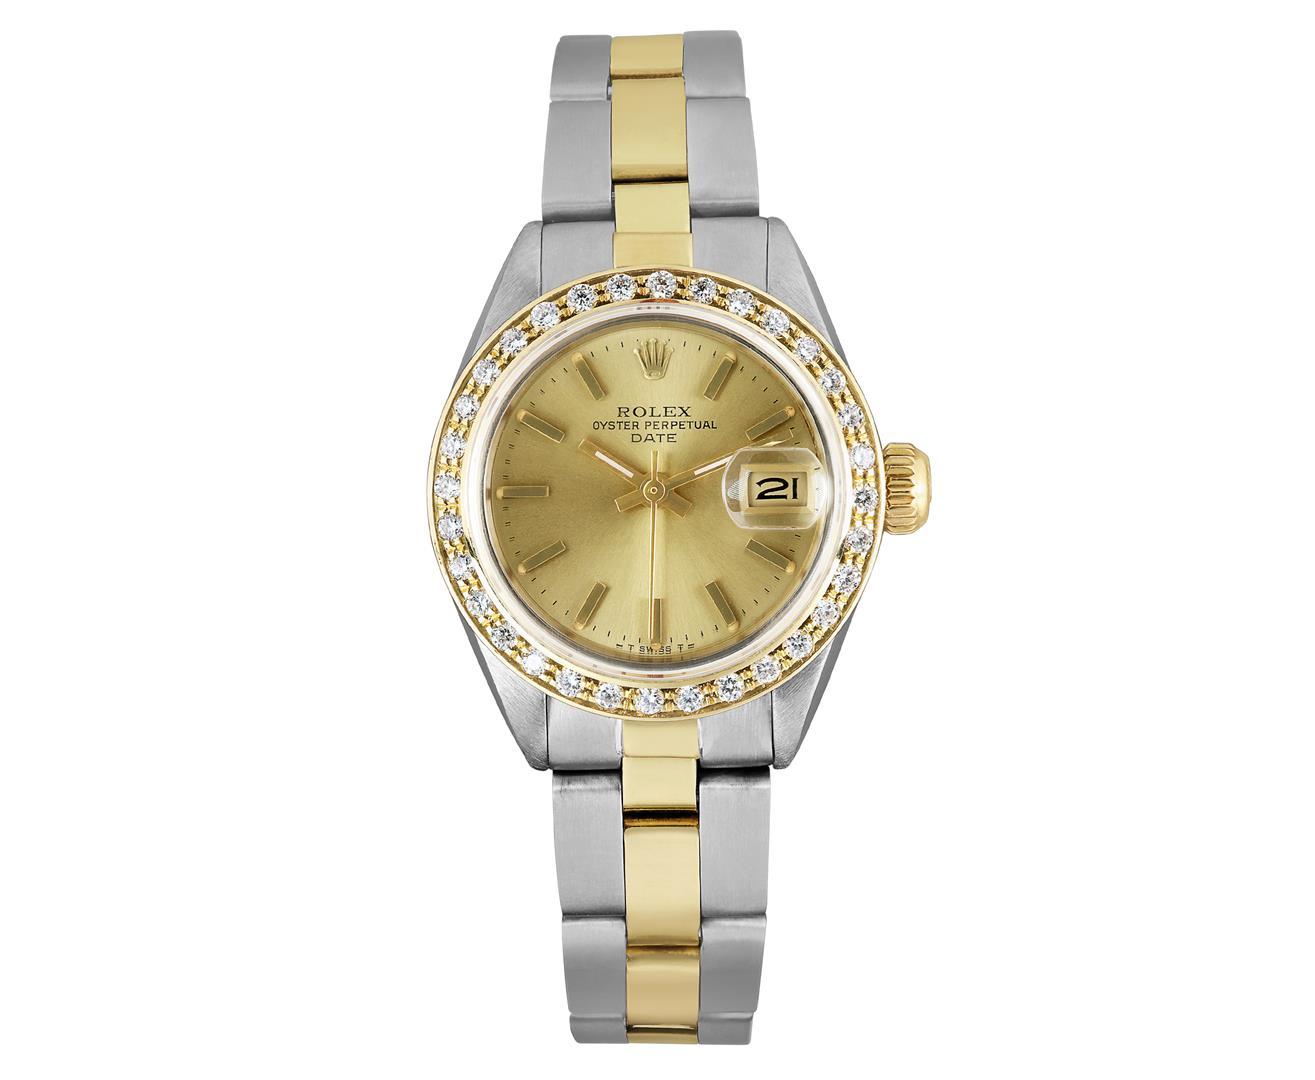 Rolex Ladies 2Tone Gold And Seel 18K Diamond Bezel Date Watch With Rolex Box